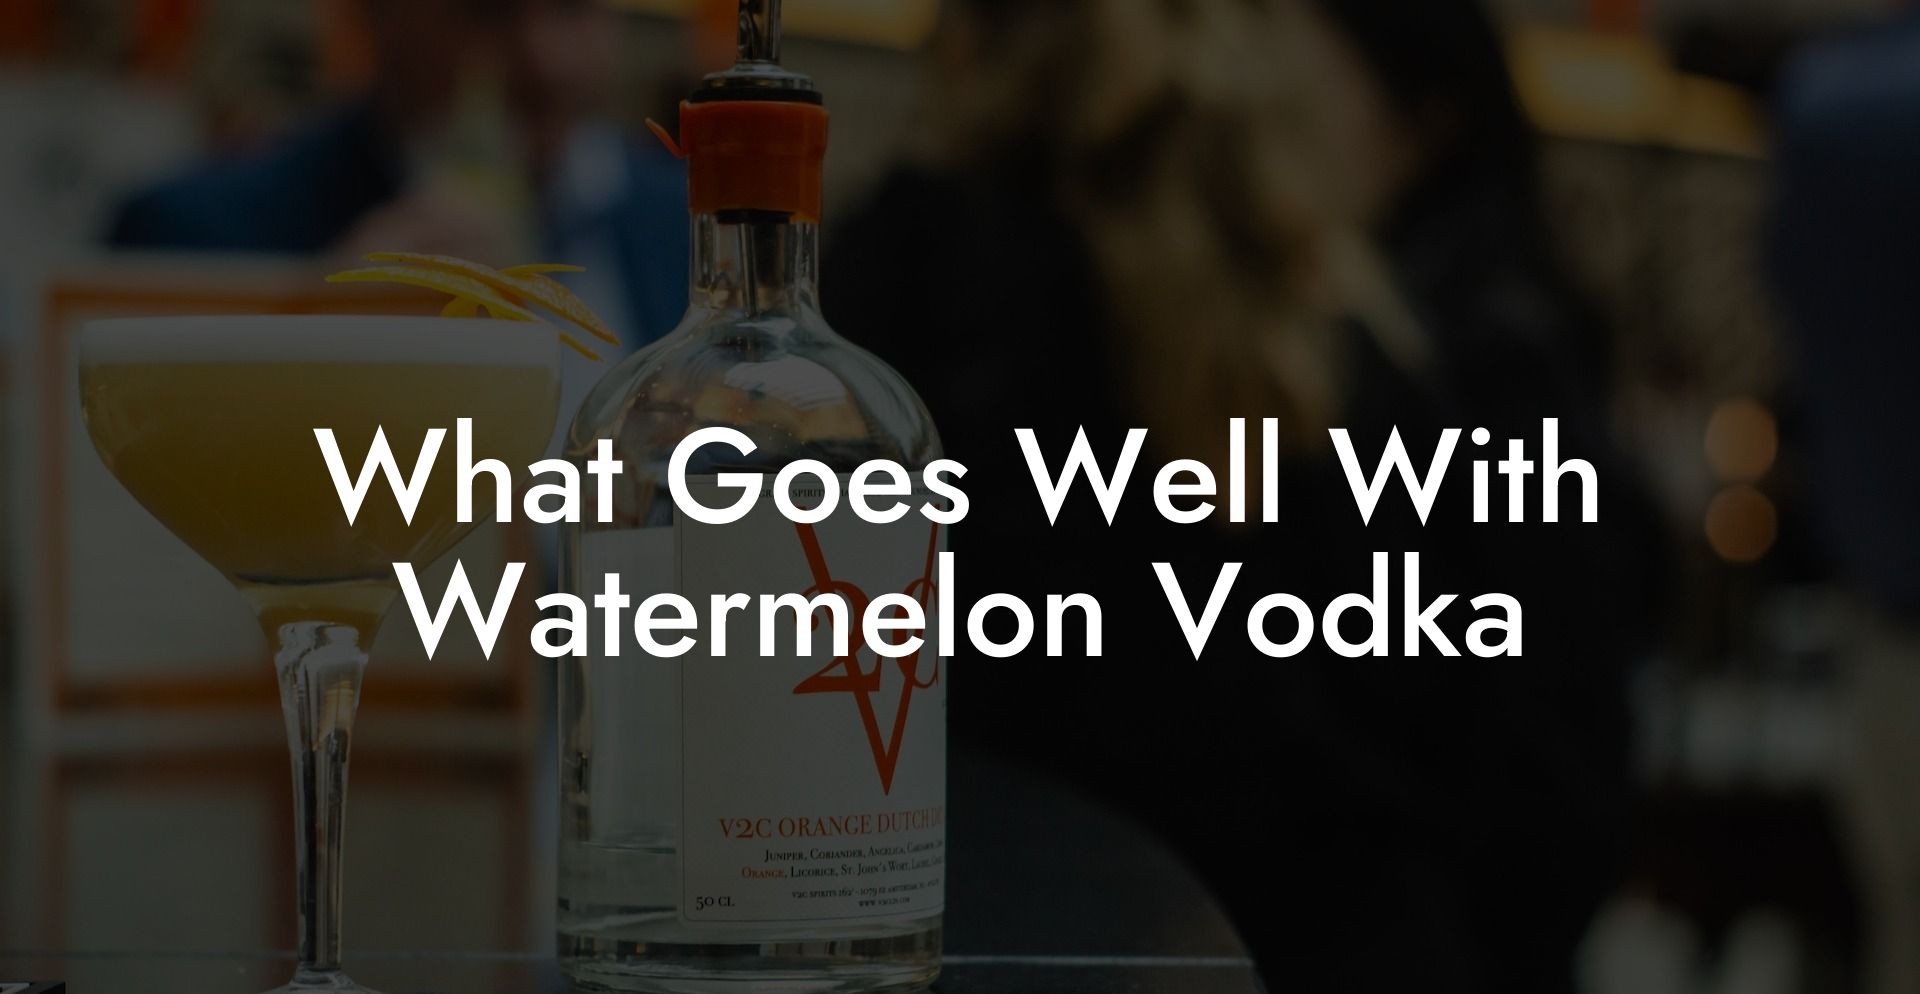 What Goes Well With Watermelon Vodka